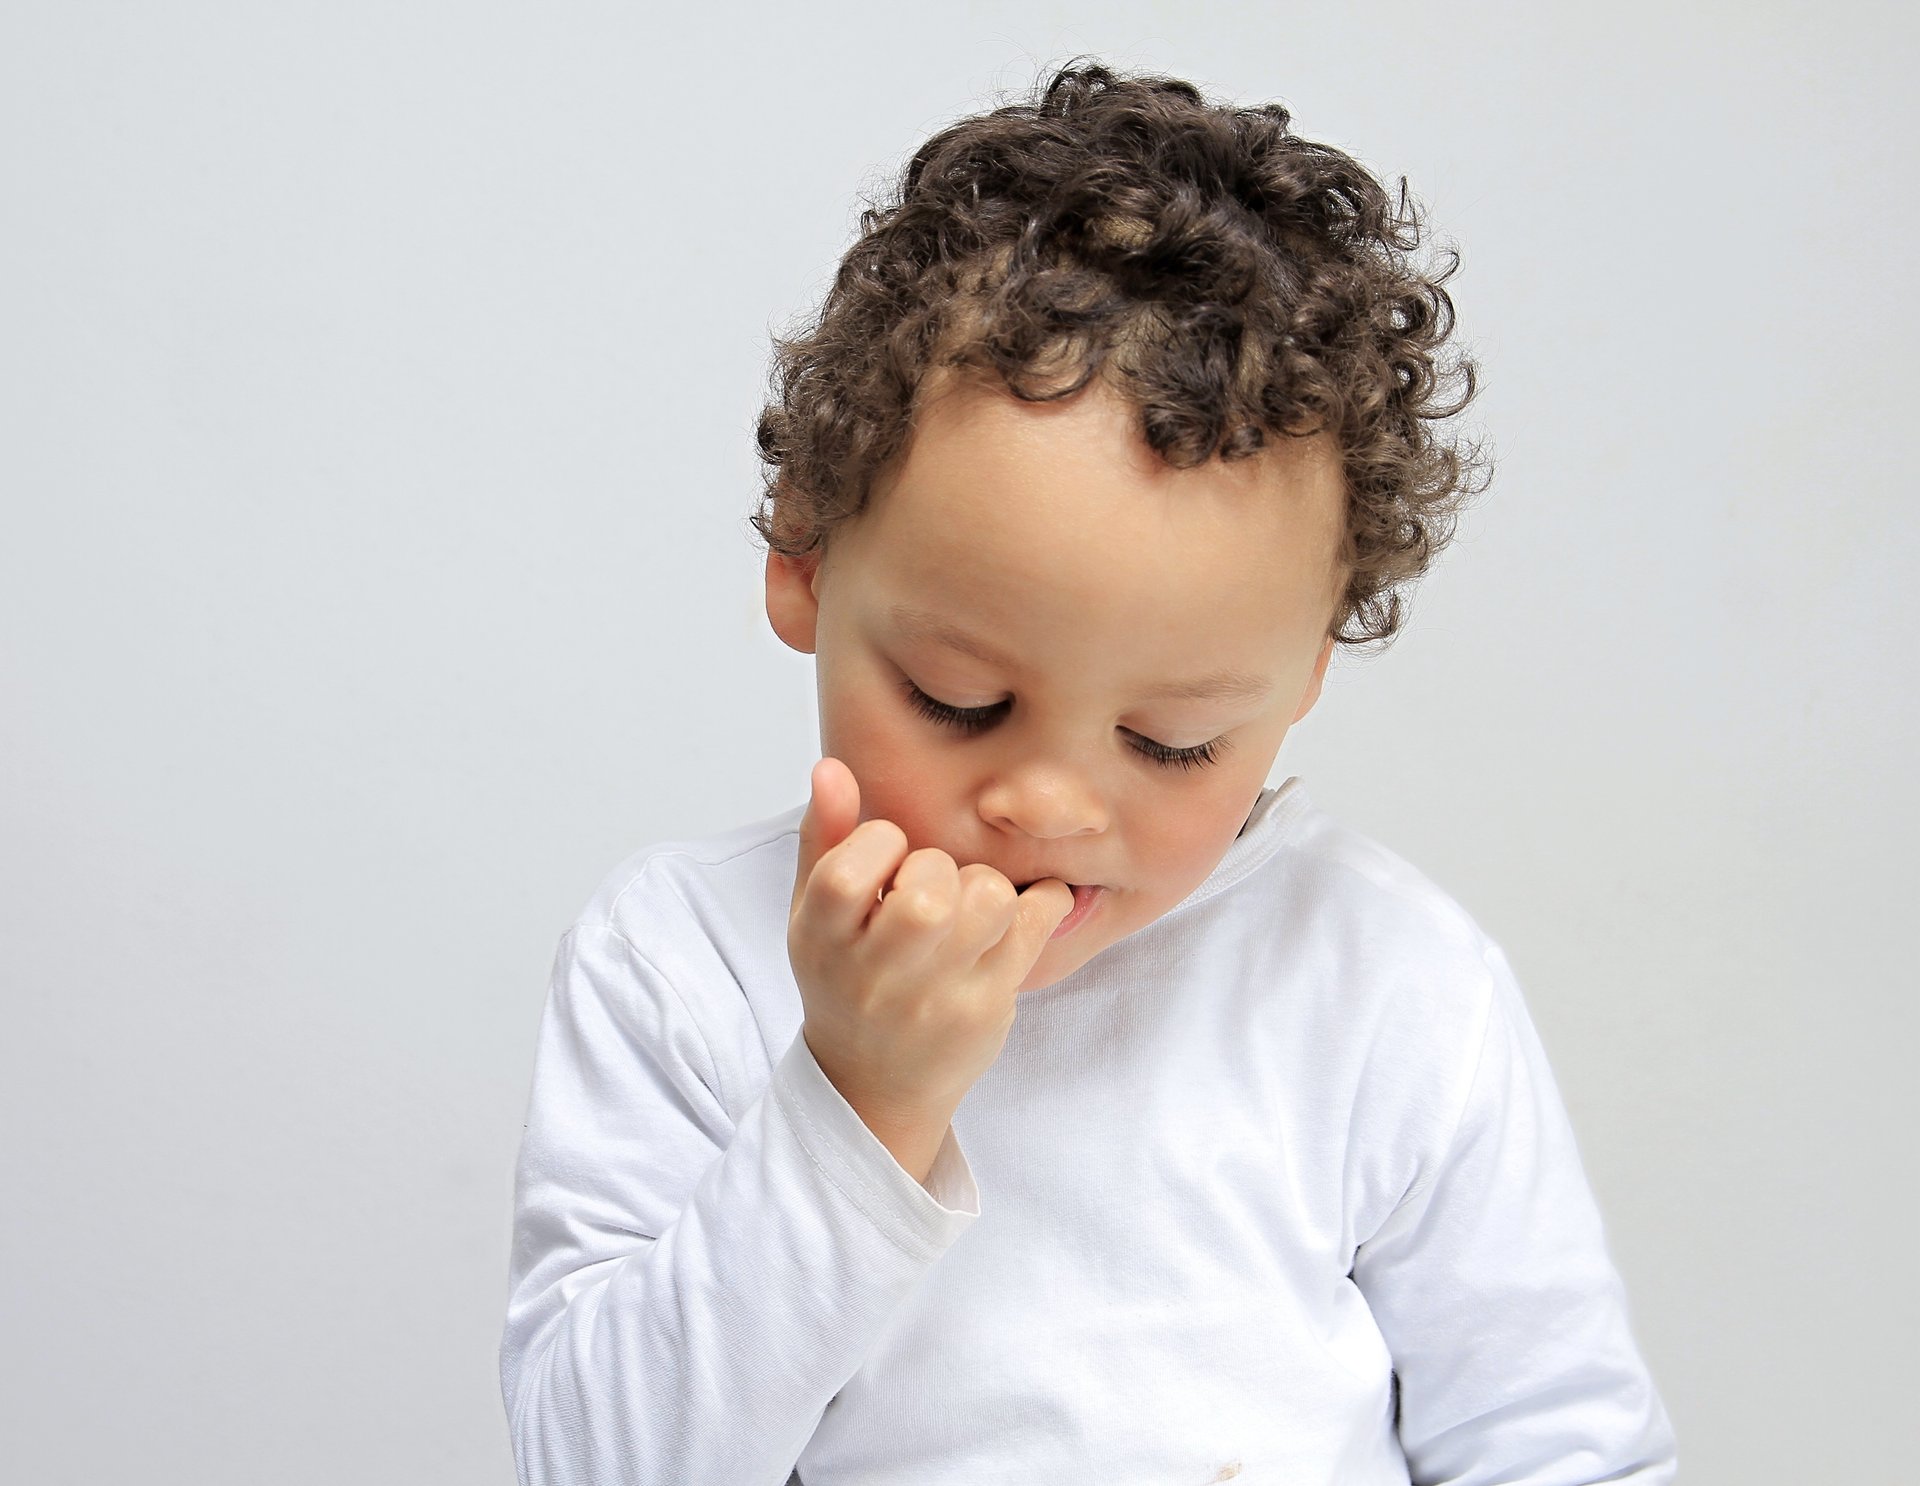 How to Get Kids to Stop Biting Their Nails: 14 Tips for Parents